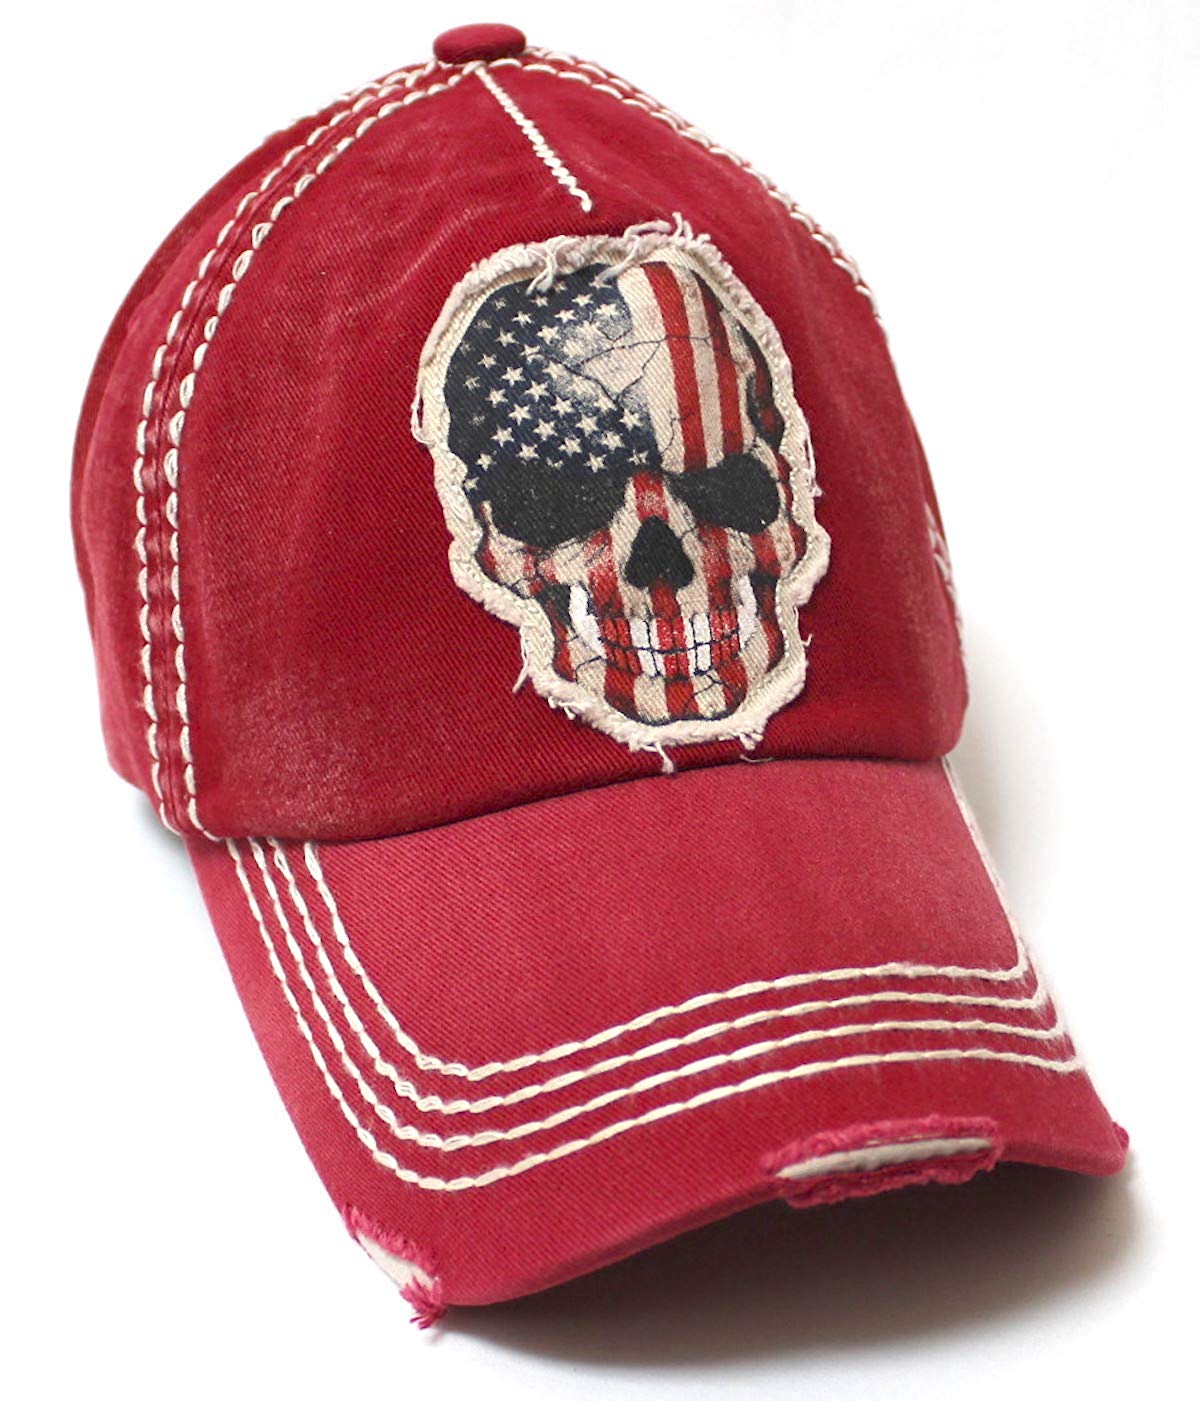 Classic Ballcap American Flag Skull Patch Embroidery Vintage Hat, Red - Caps 'N Vintage 